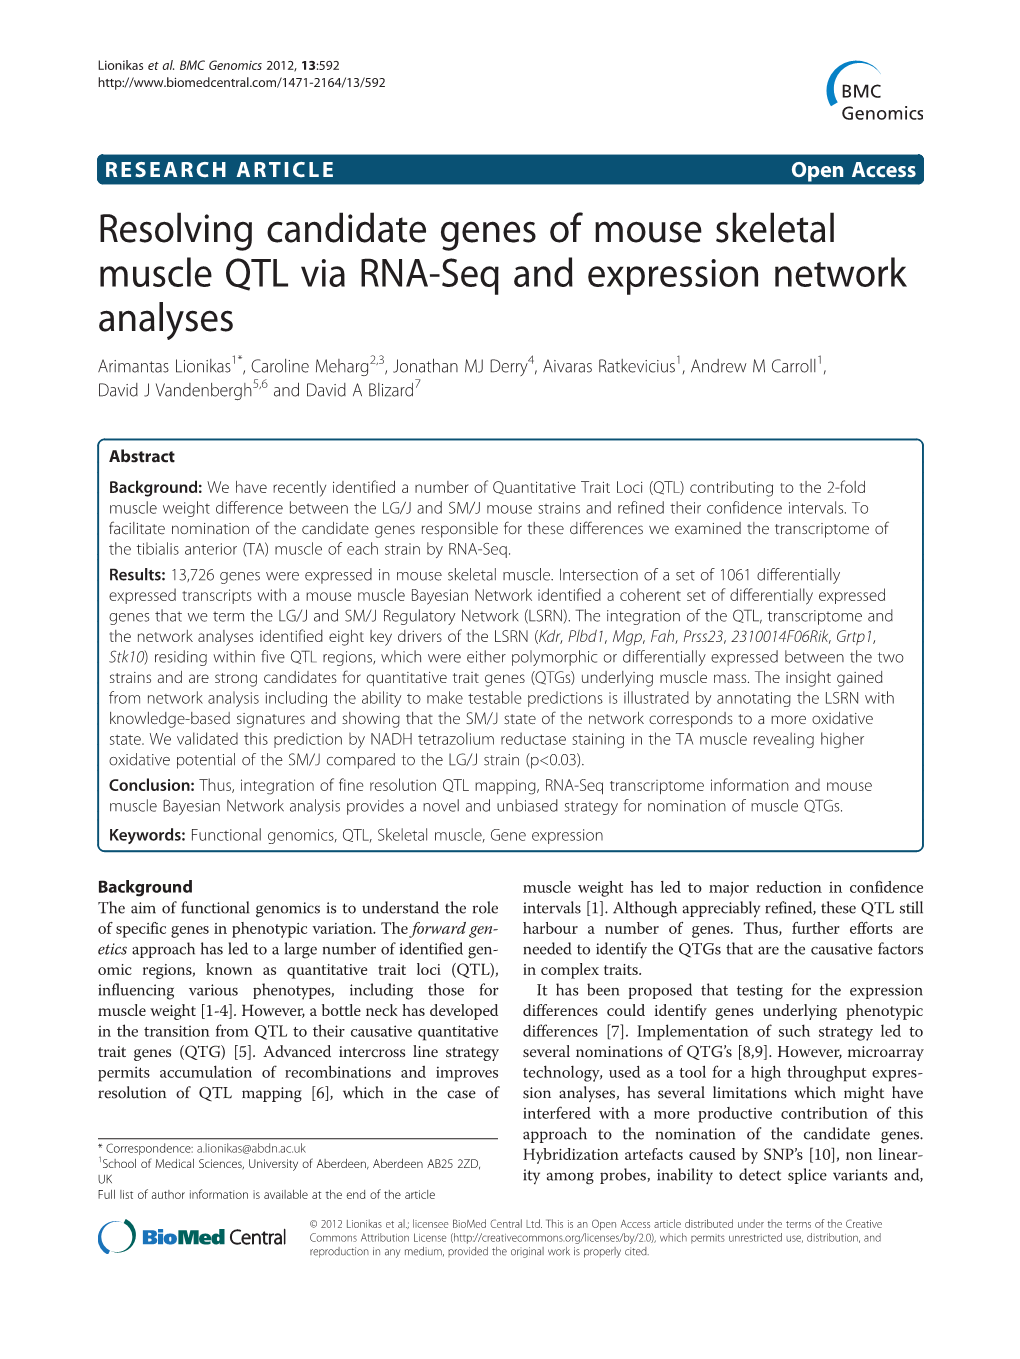 Resolving Candidate Genes of Mouse Skeletal Muscle QTL Via RNA-Seq